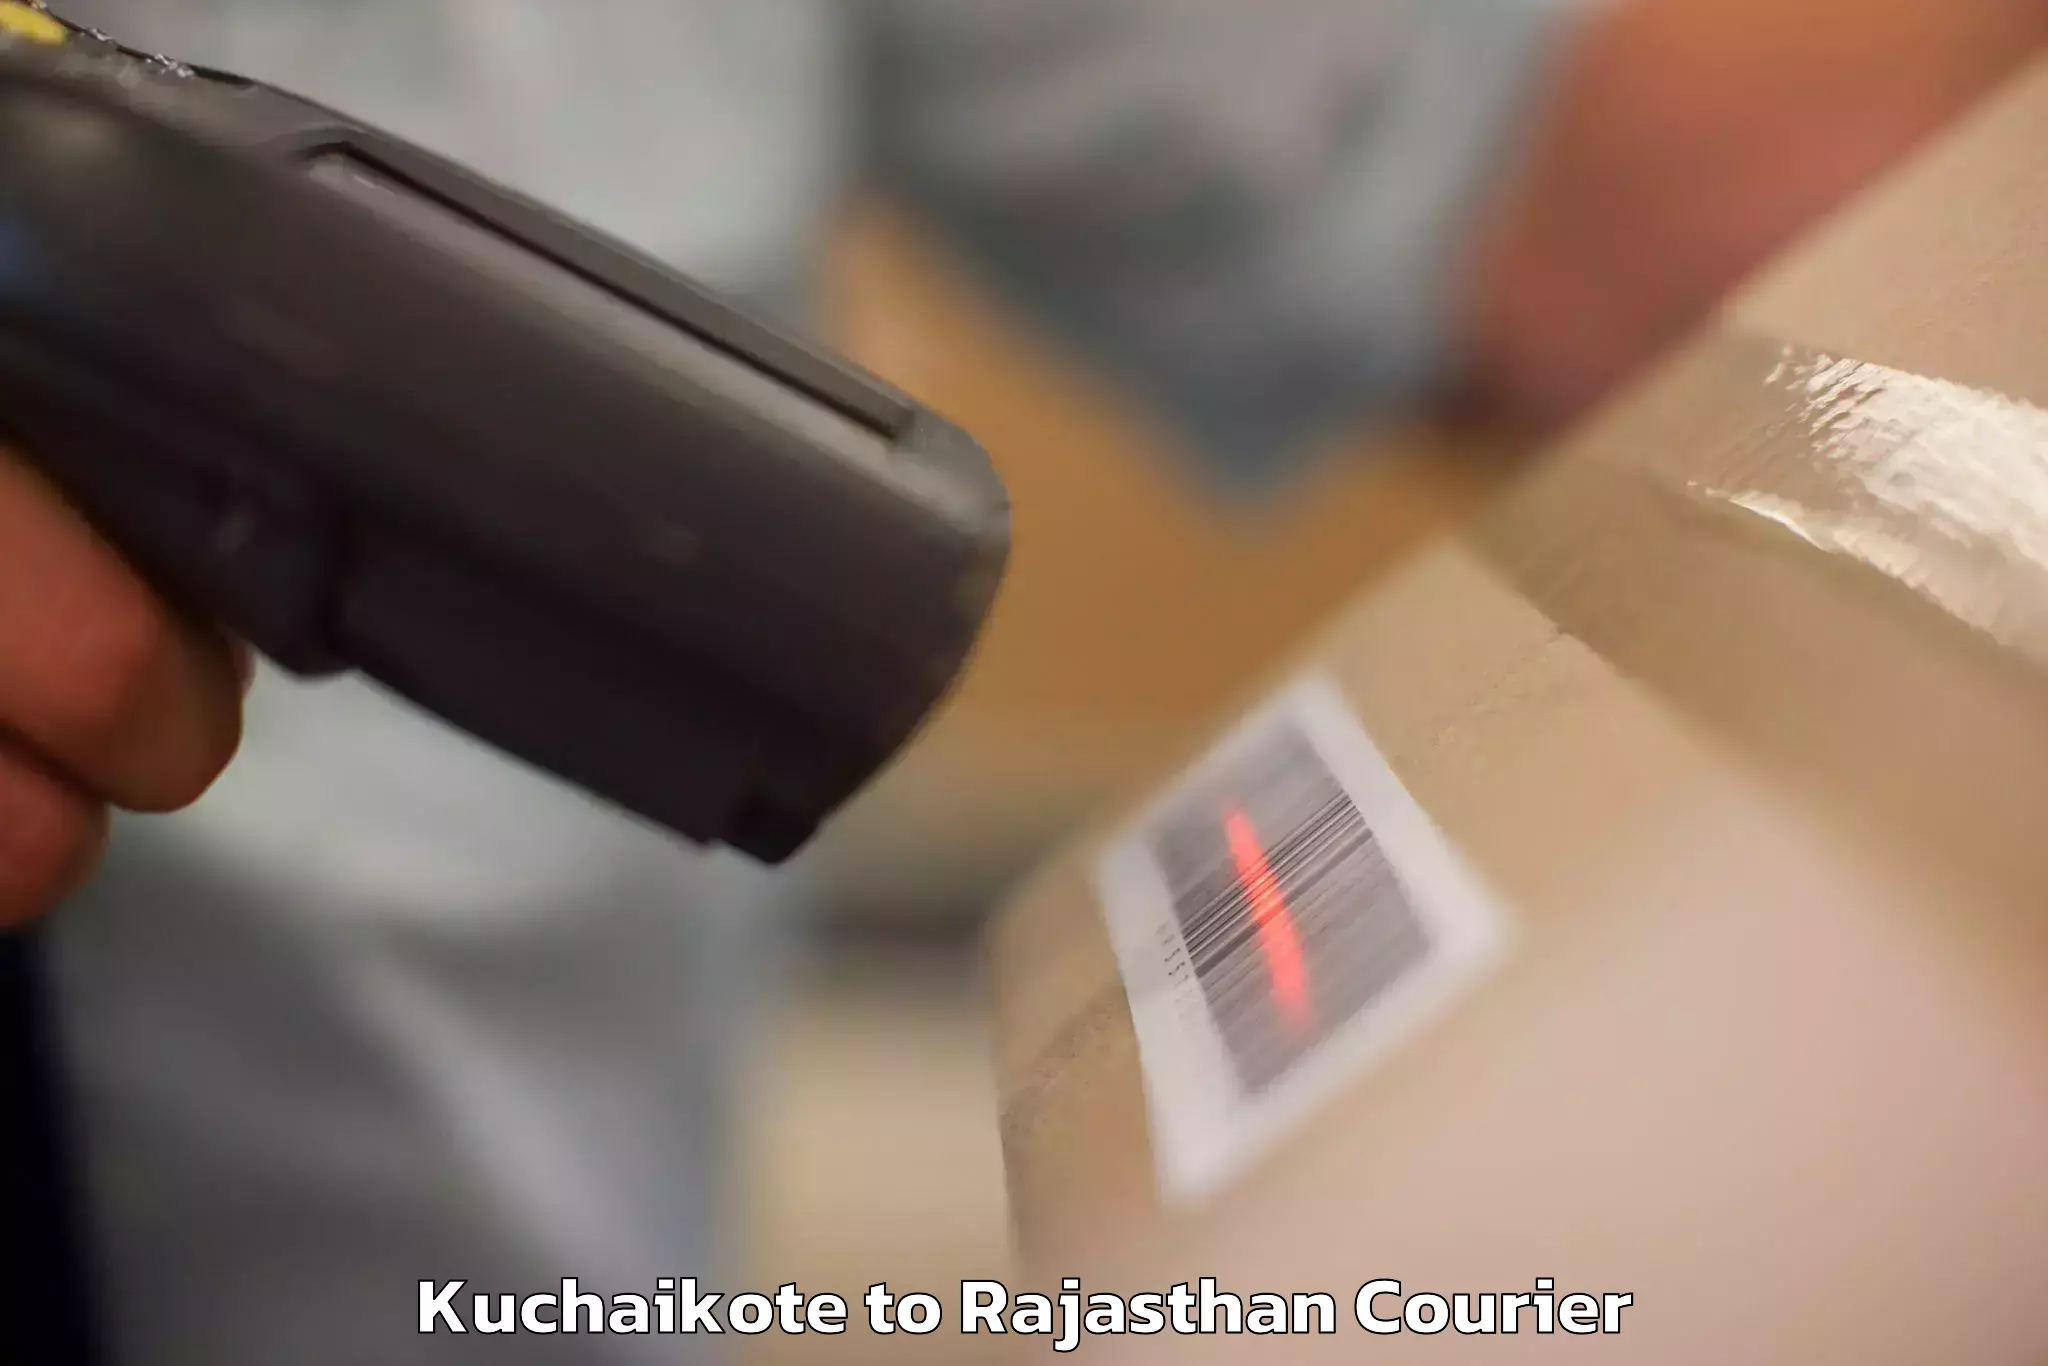 Luggage shipment specialists Kuchaikote to Rajasthan